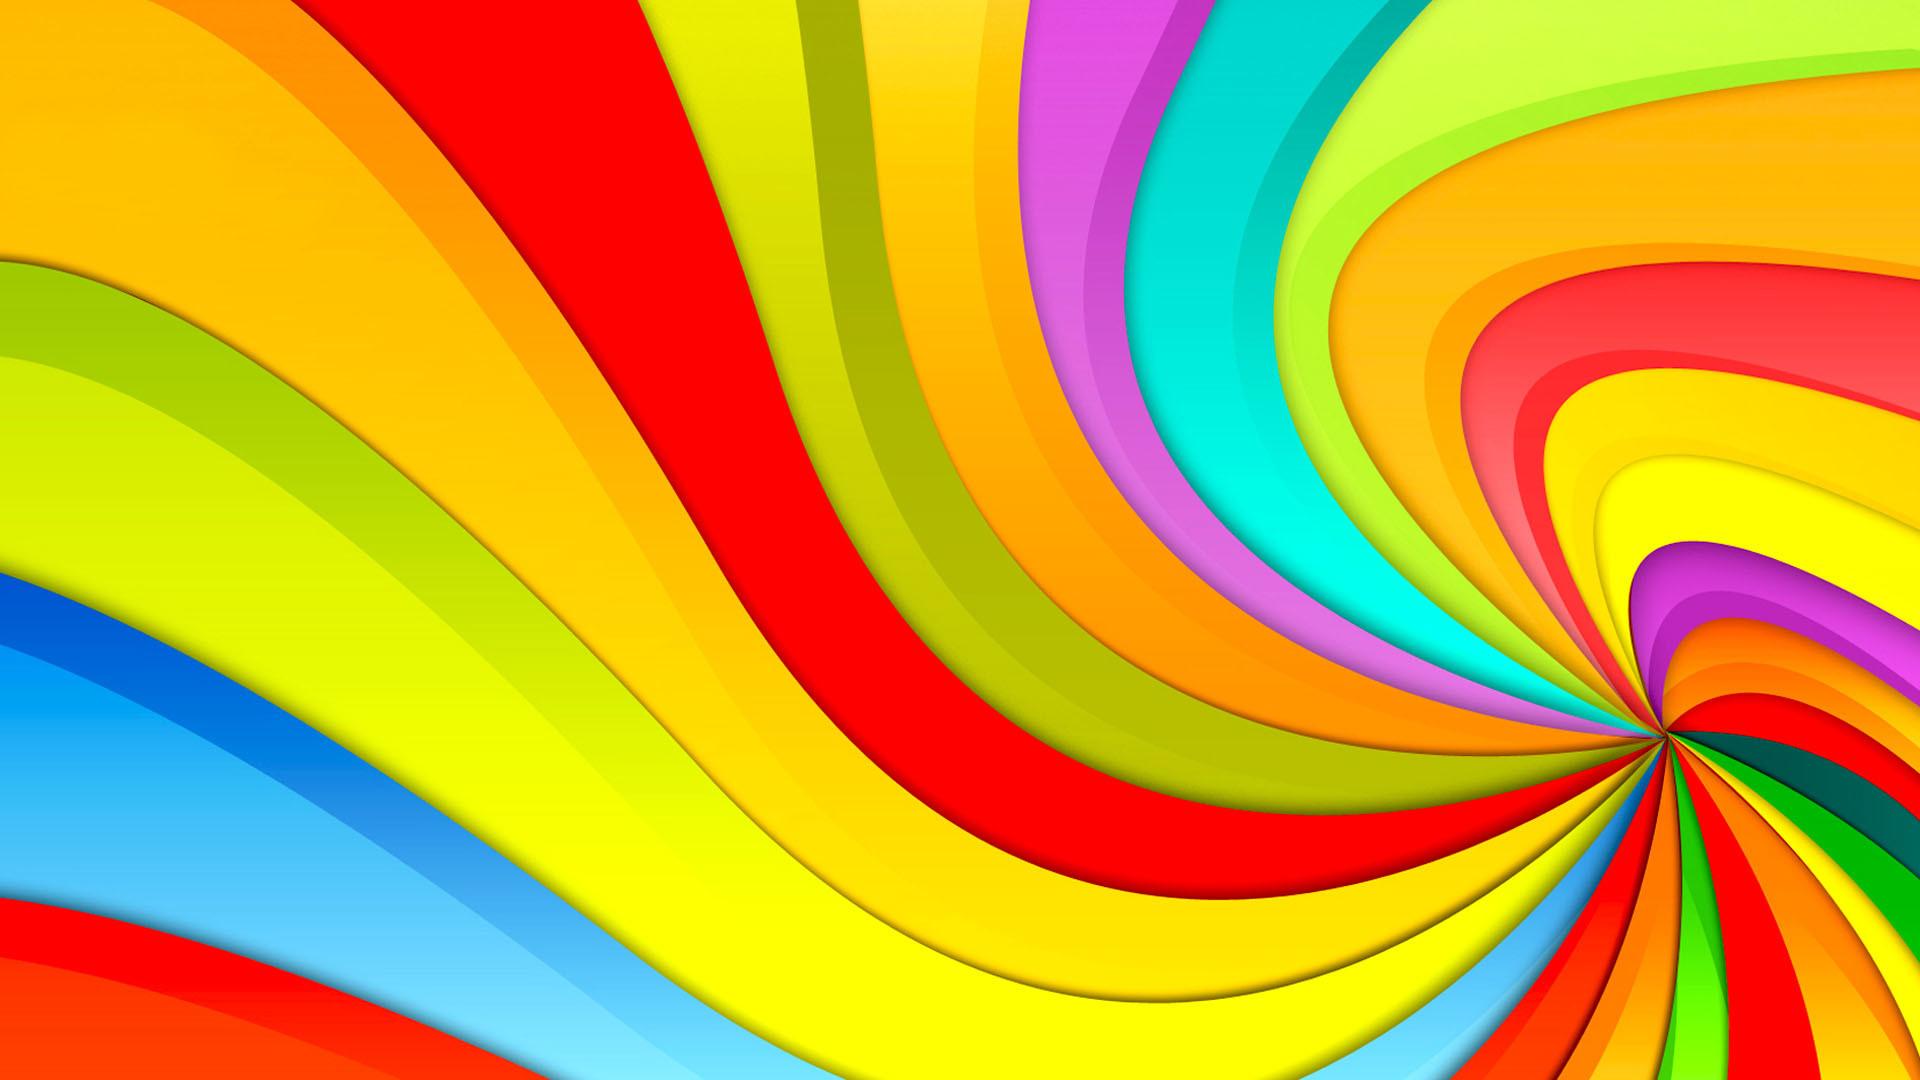 1920 x 1080 · jpeg - Bright Colors Backgrounds (64+ images)